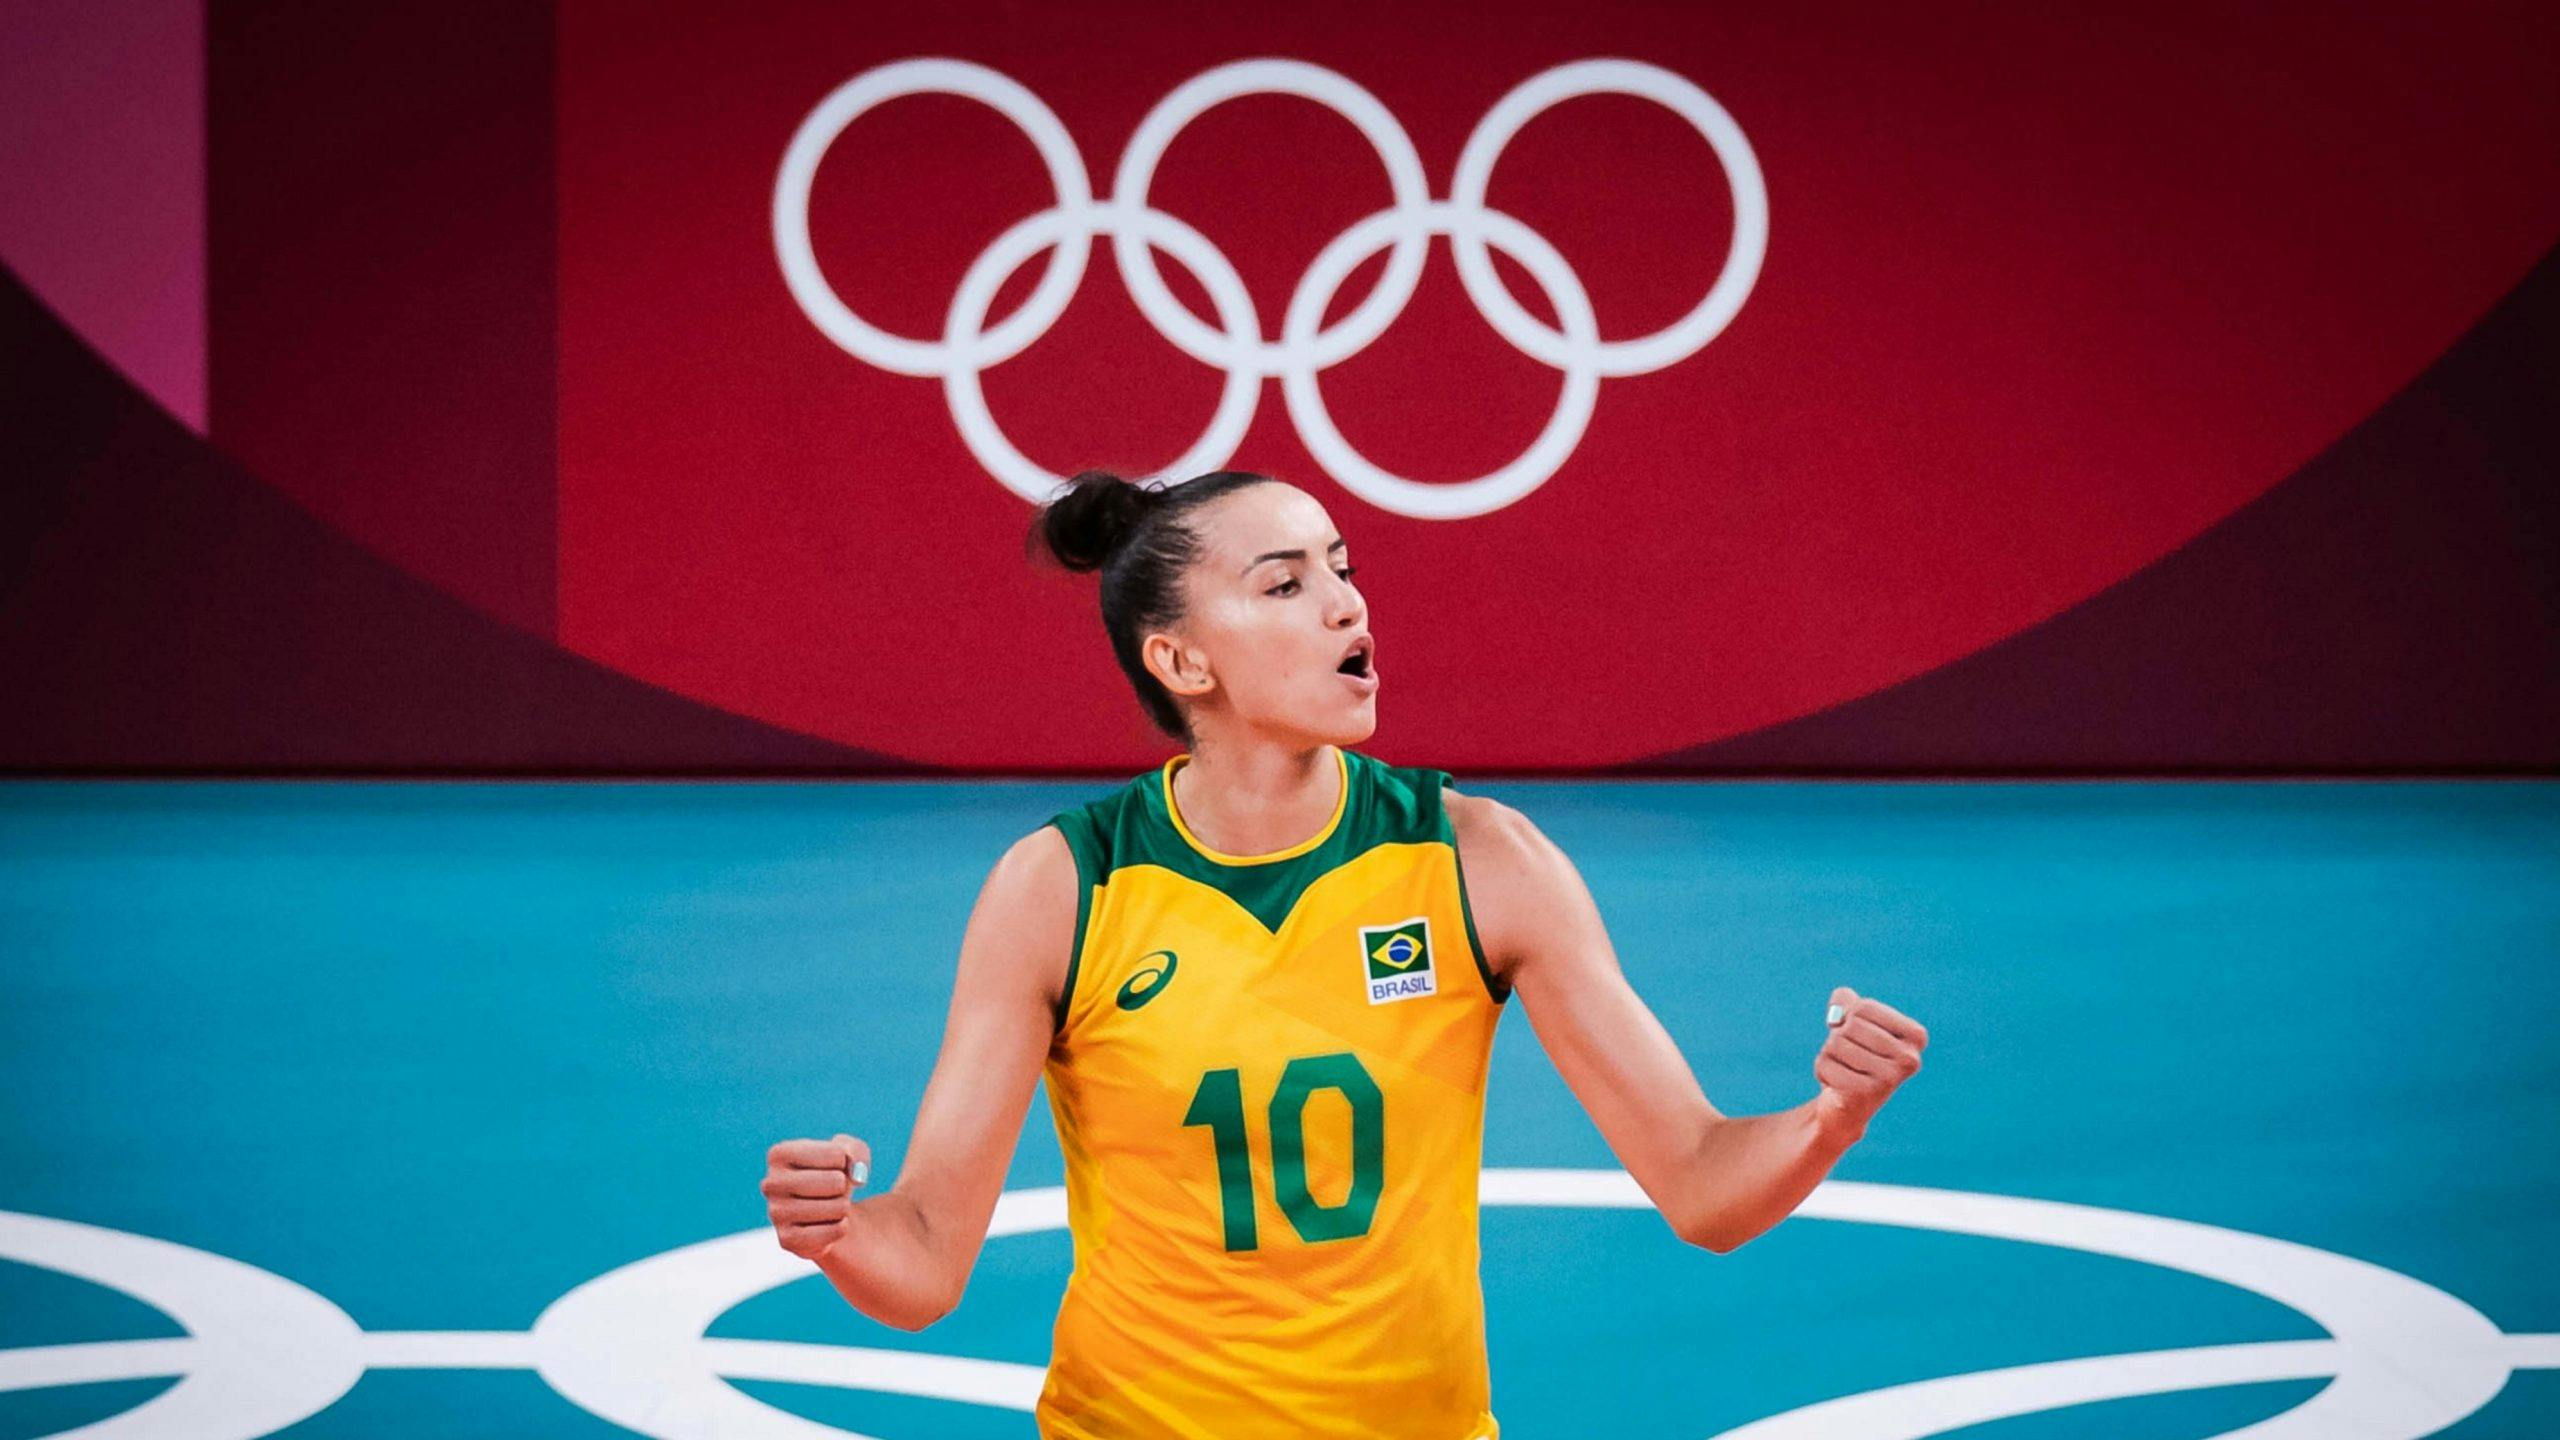 Paris 2024: Women’s volleyball draw revealed as World No. 1 Brazil leads Pool B
